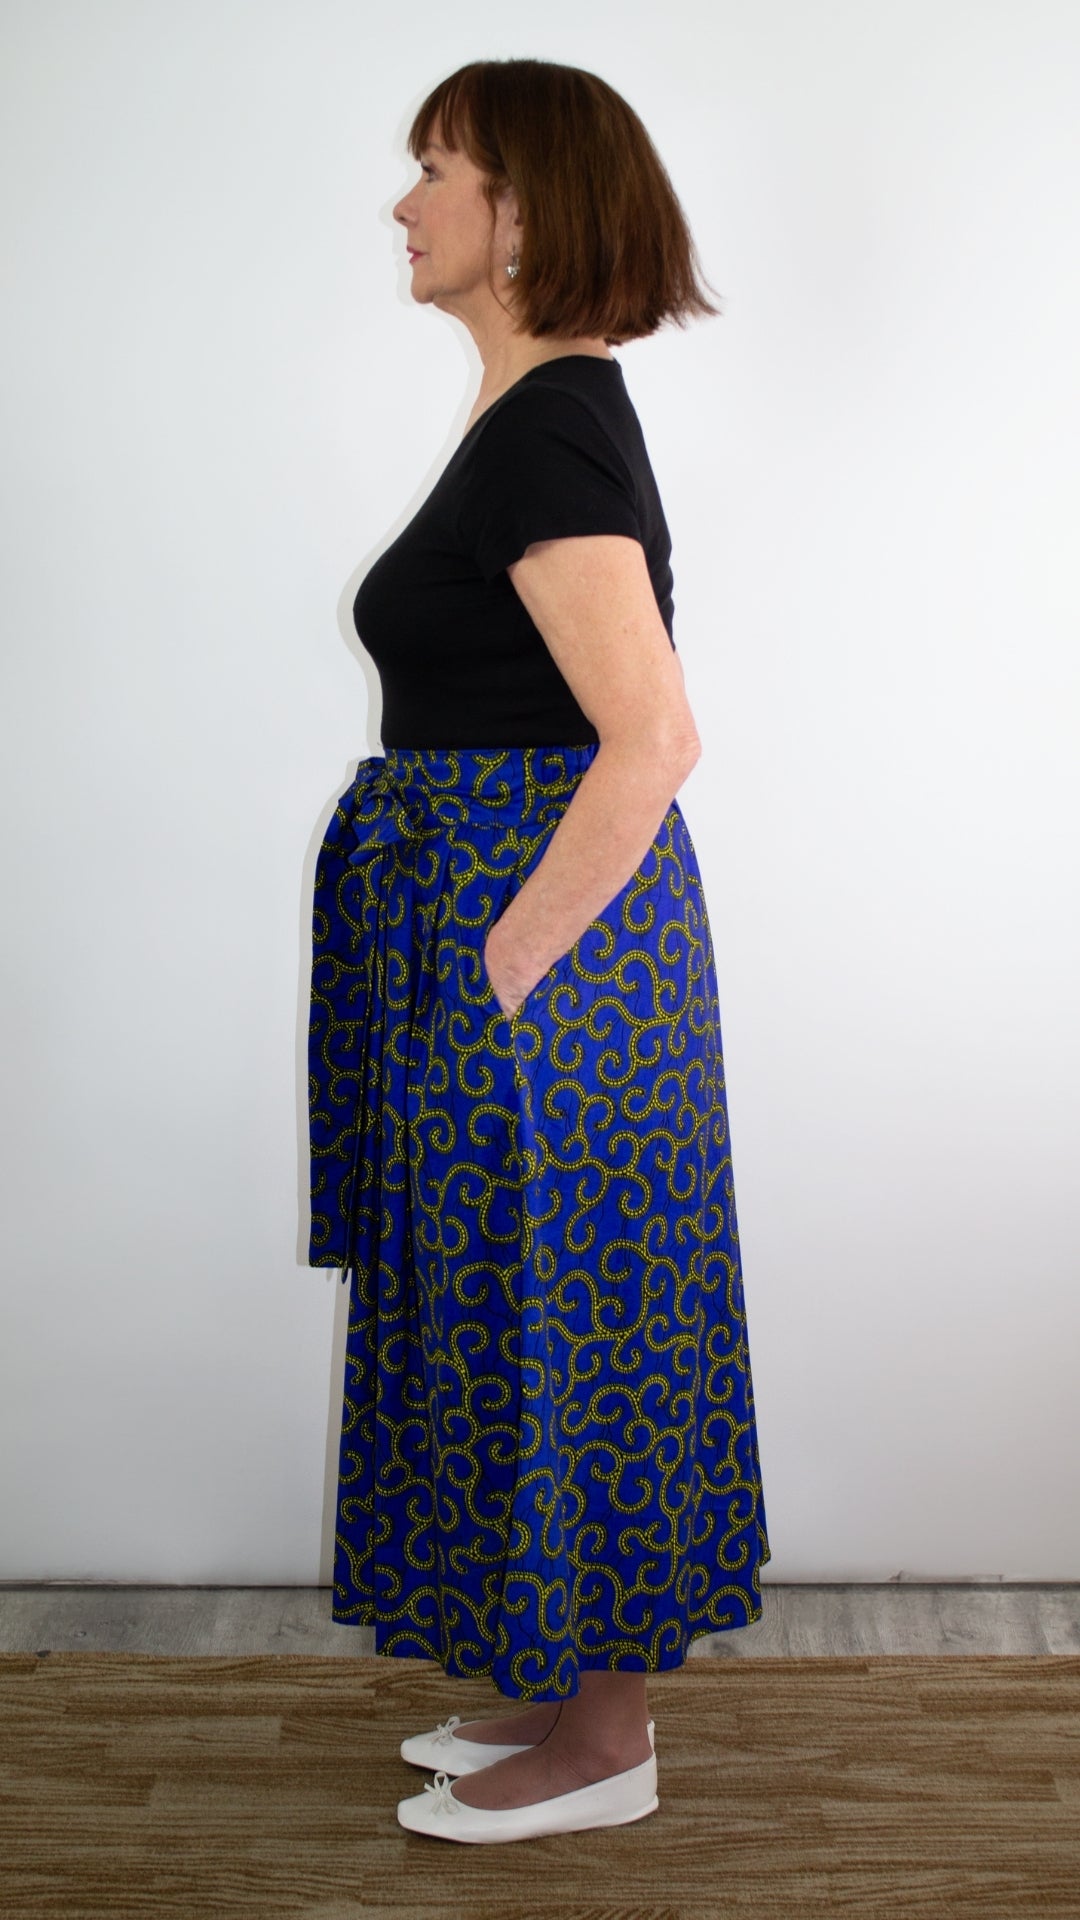 A side view of a model posing in a swirly blue print skirt with golden elements, highlighting the deep pockets and the beautiful silhouette of the skirt, emphasising both practicality and elegance.